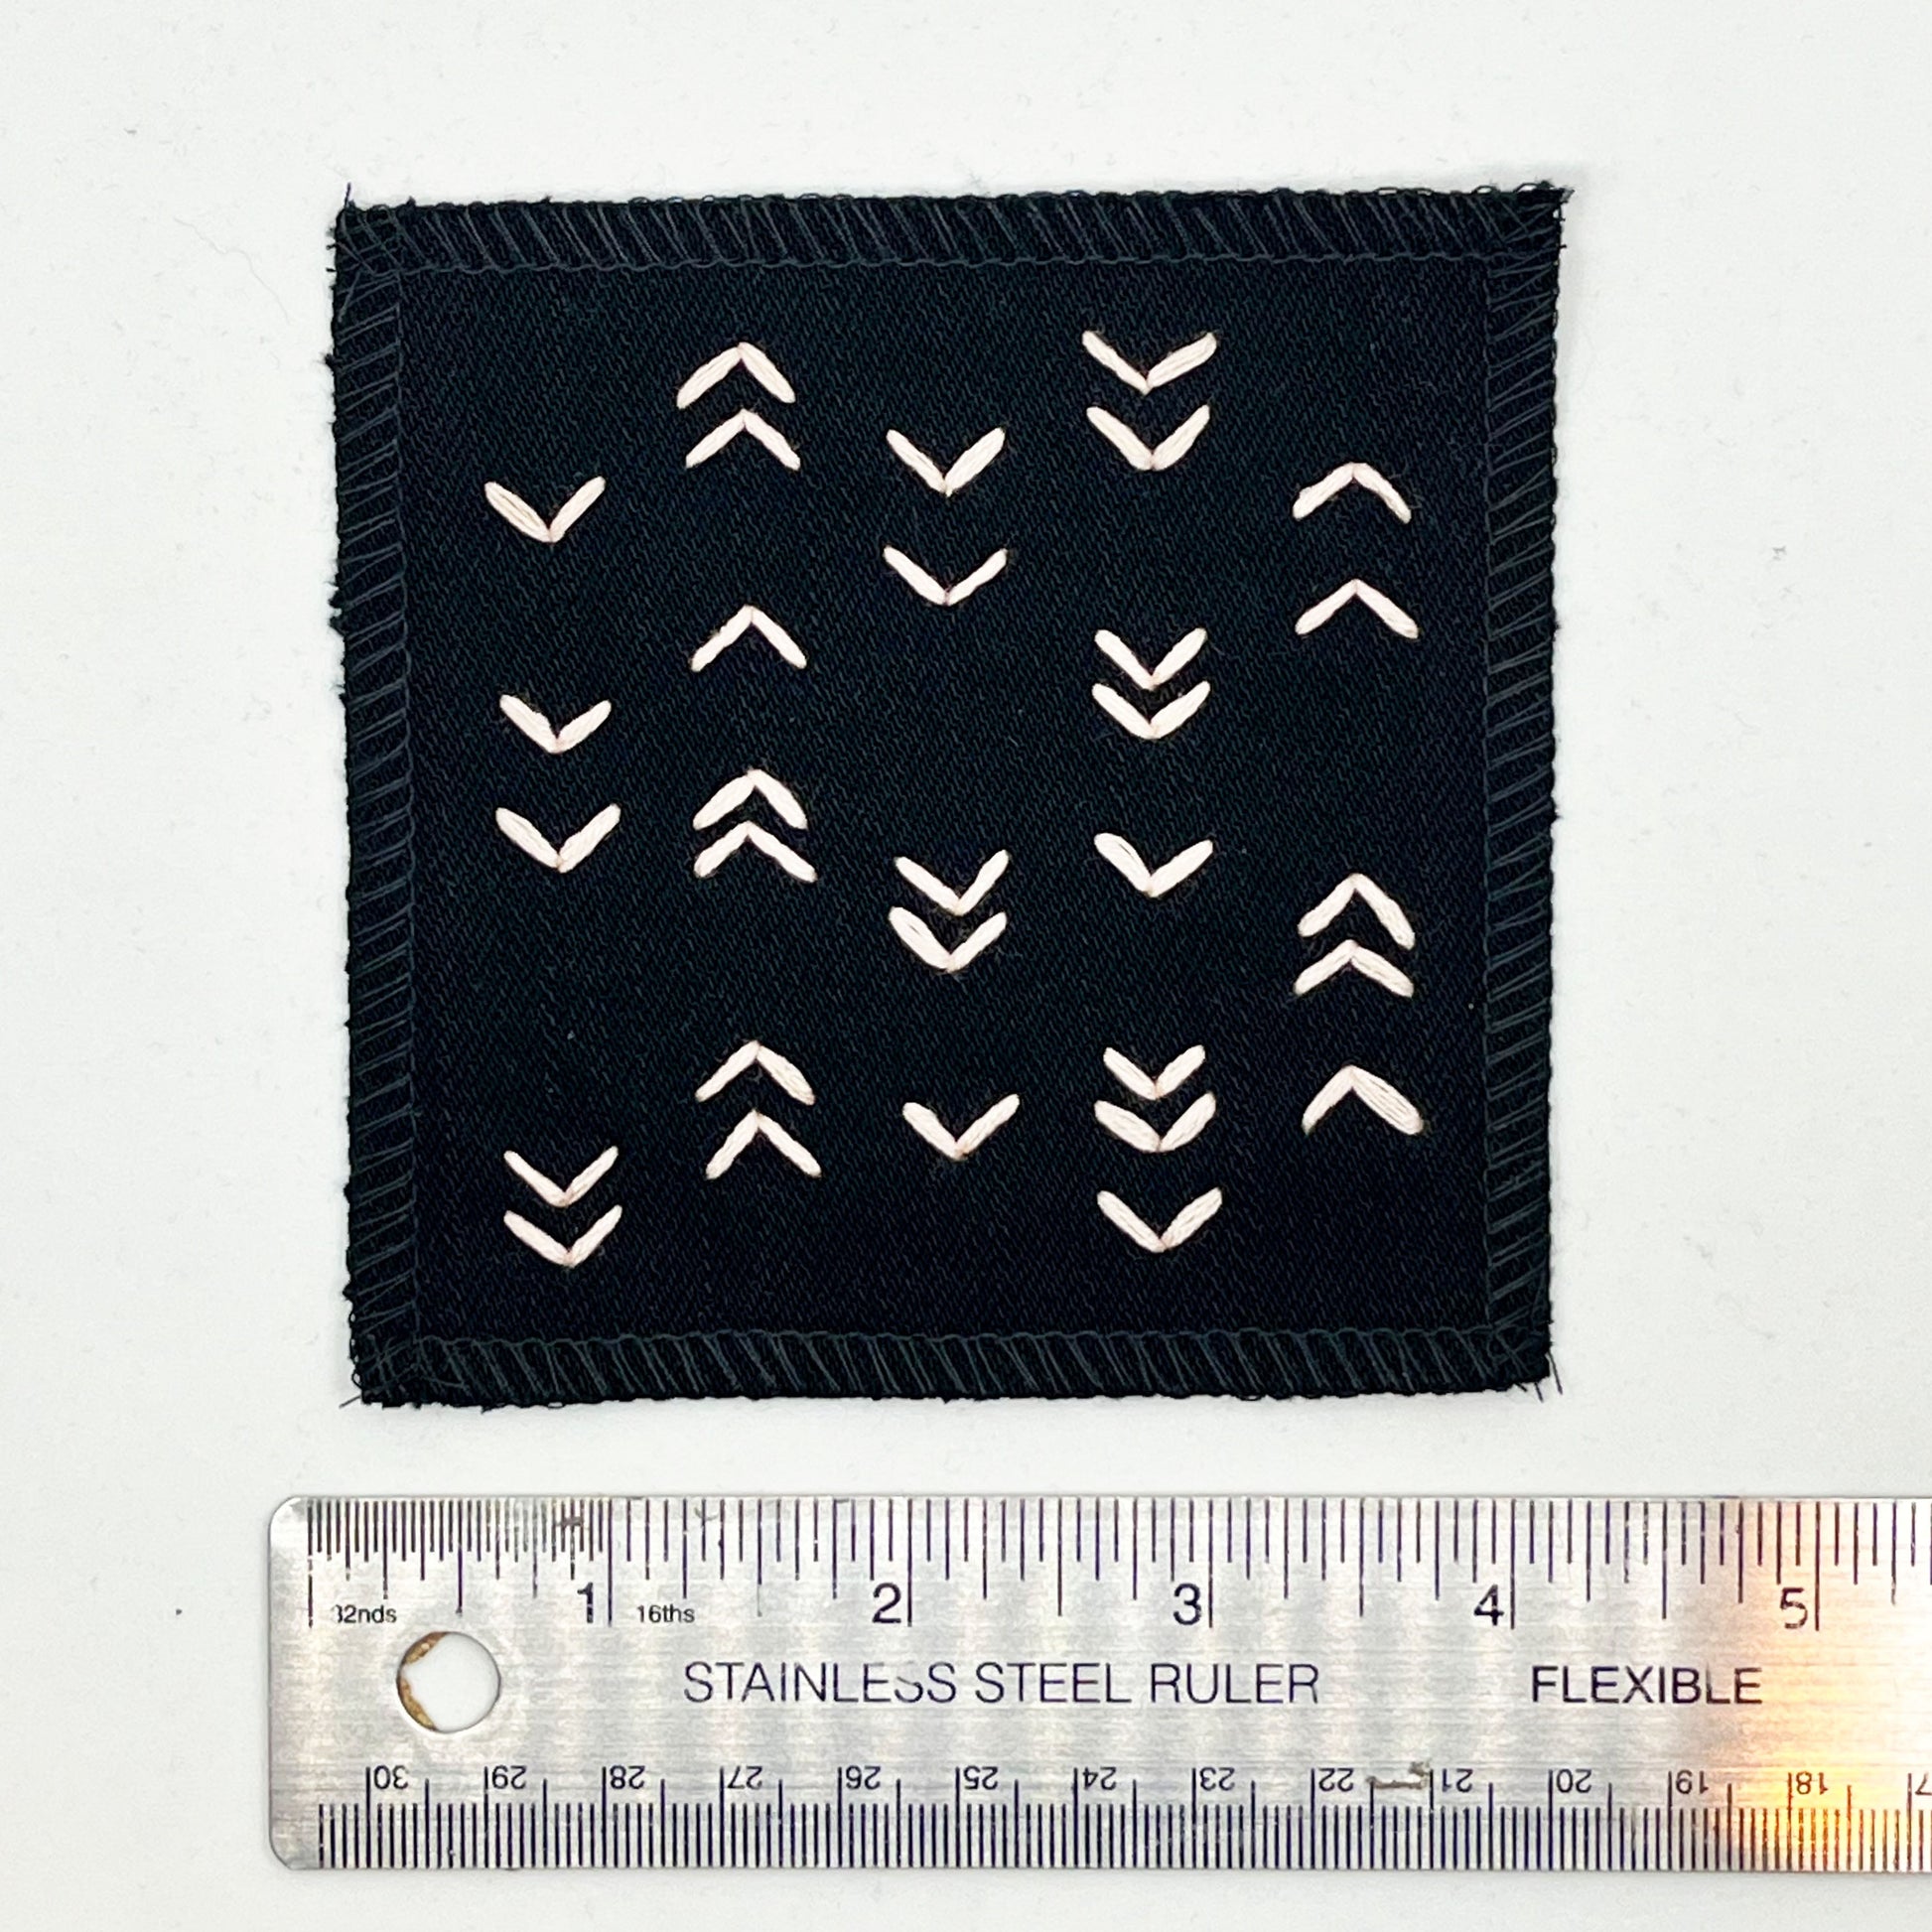 a square black denim patch hand stitched in peach with rows of unevenly spaced small chevrons facing different directions placed next to a metal ruler to show a width of four inches